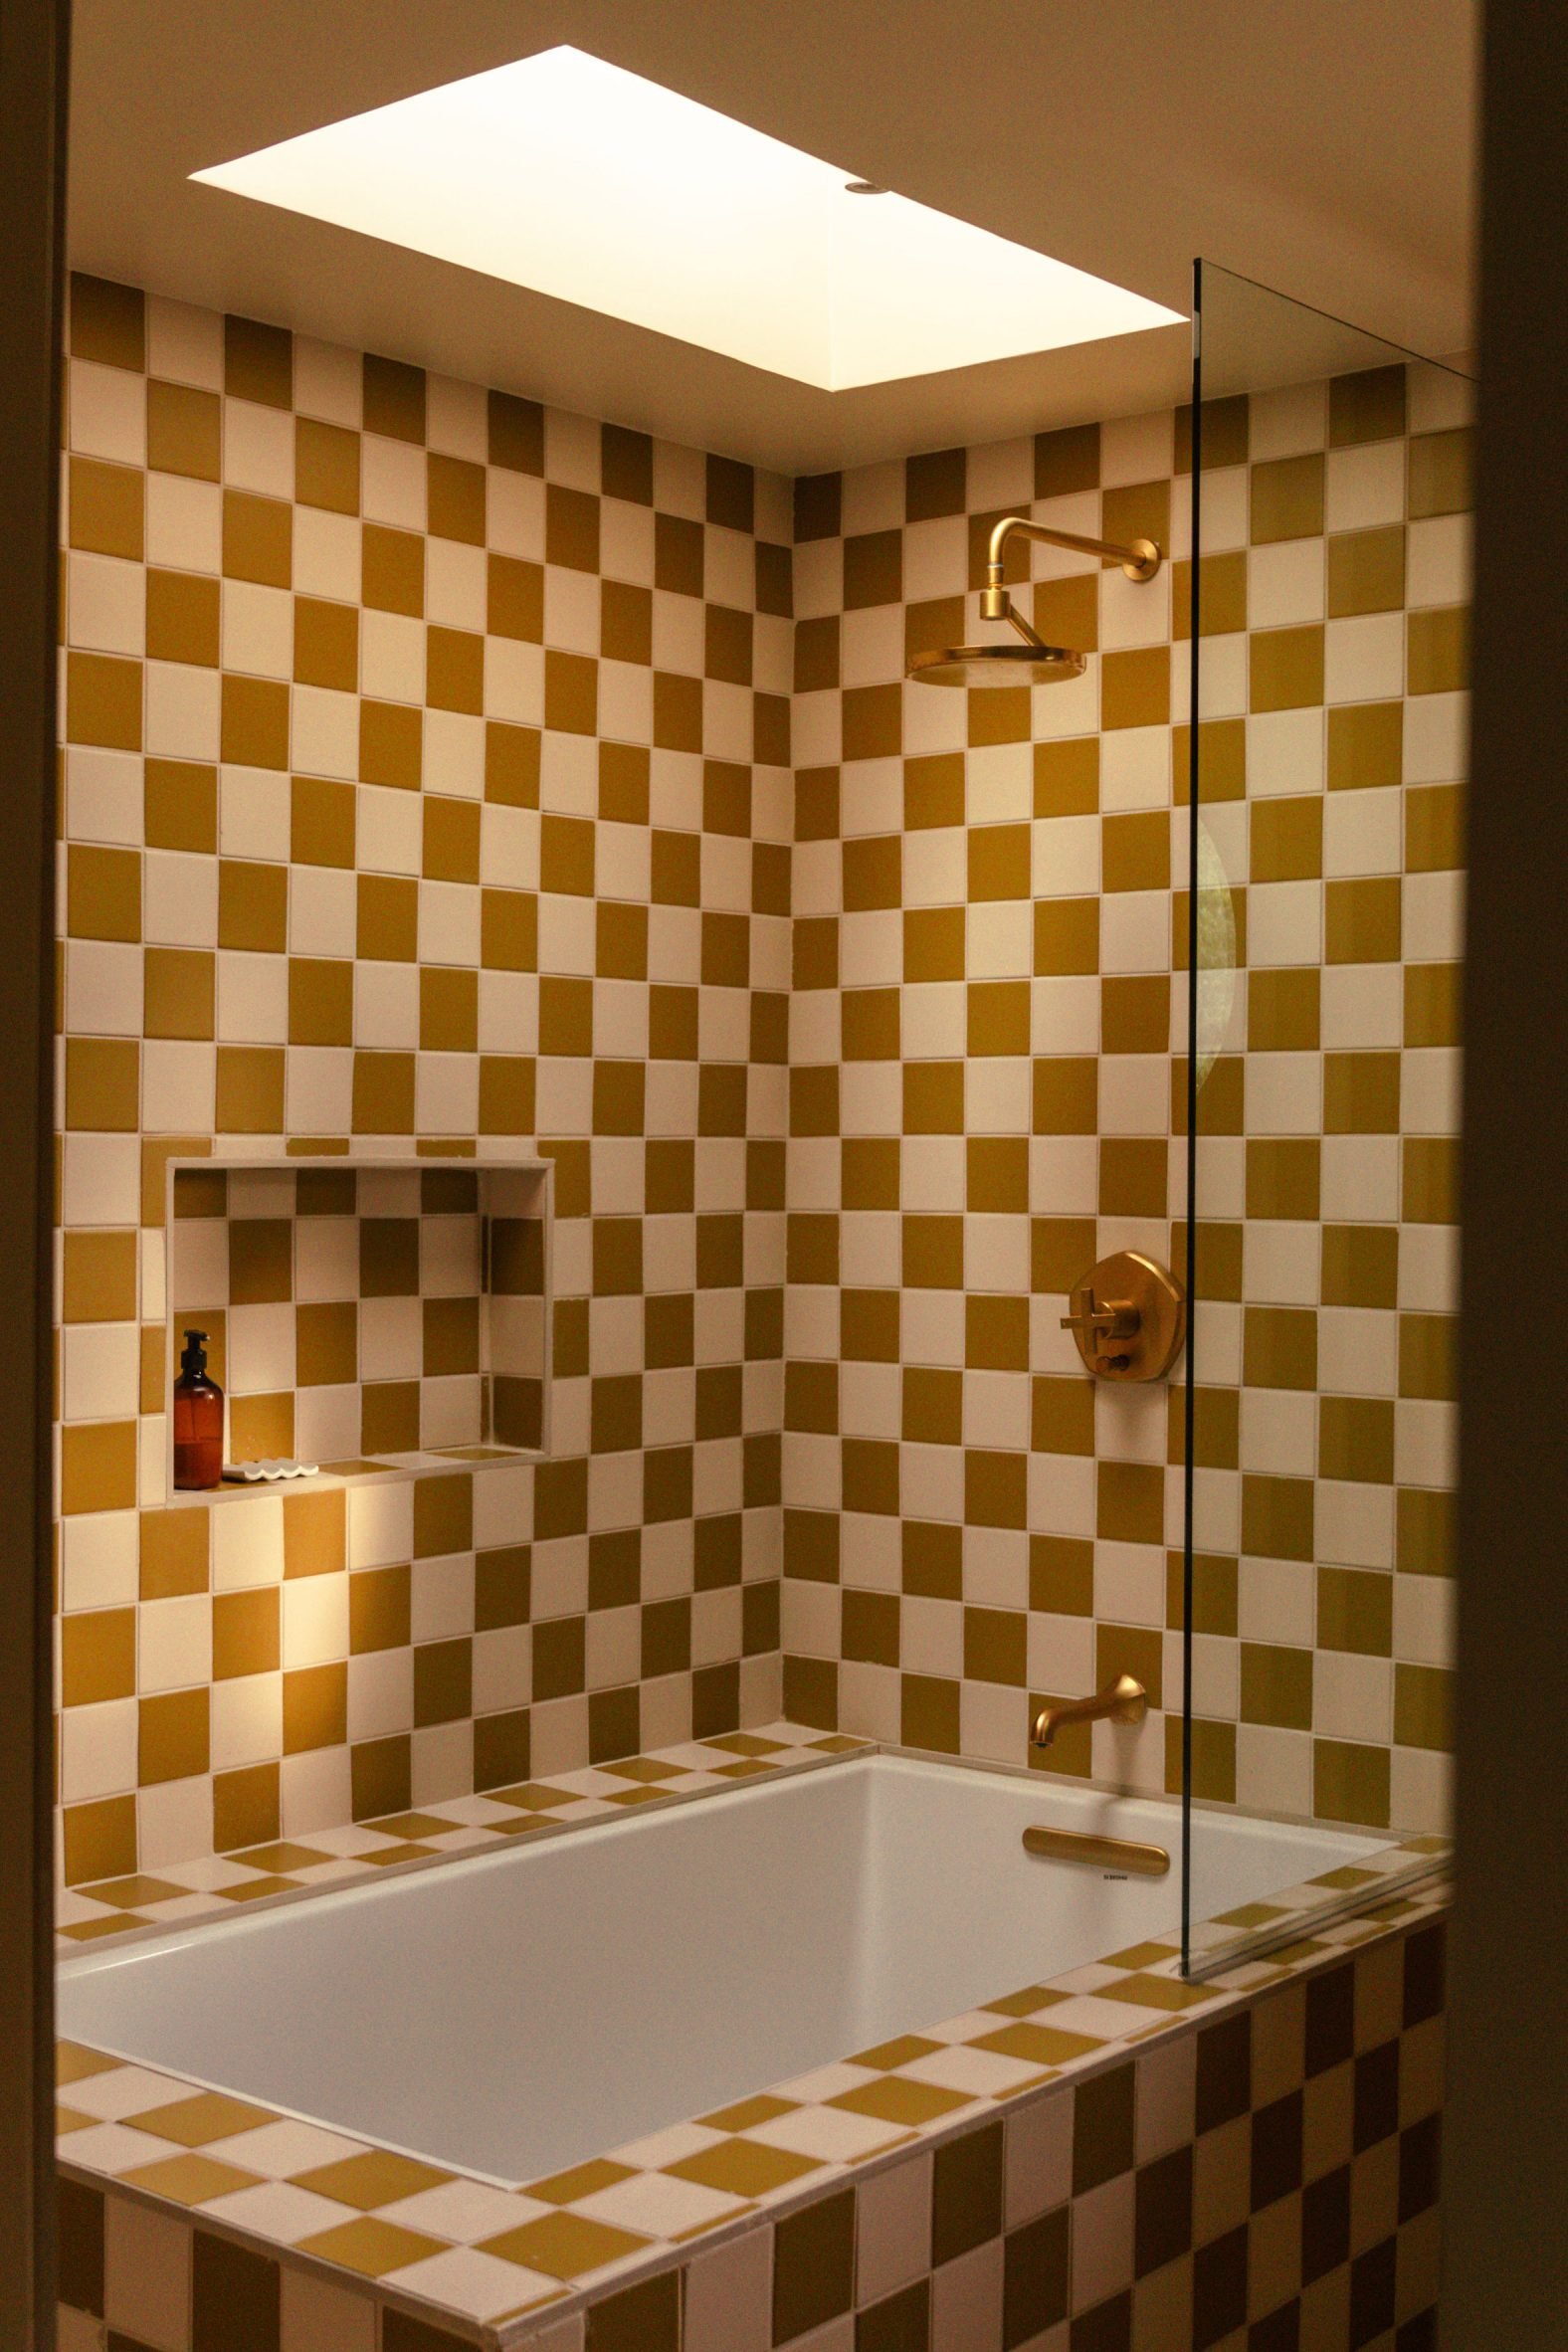 Bathroom with checkerboard tiling